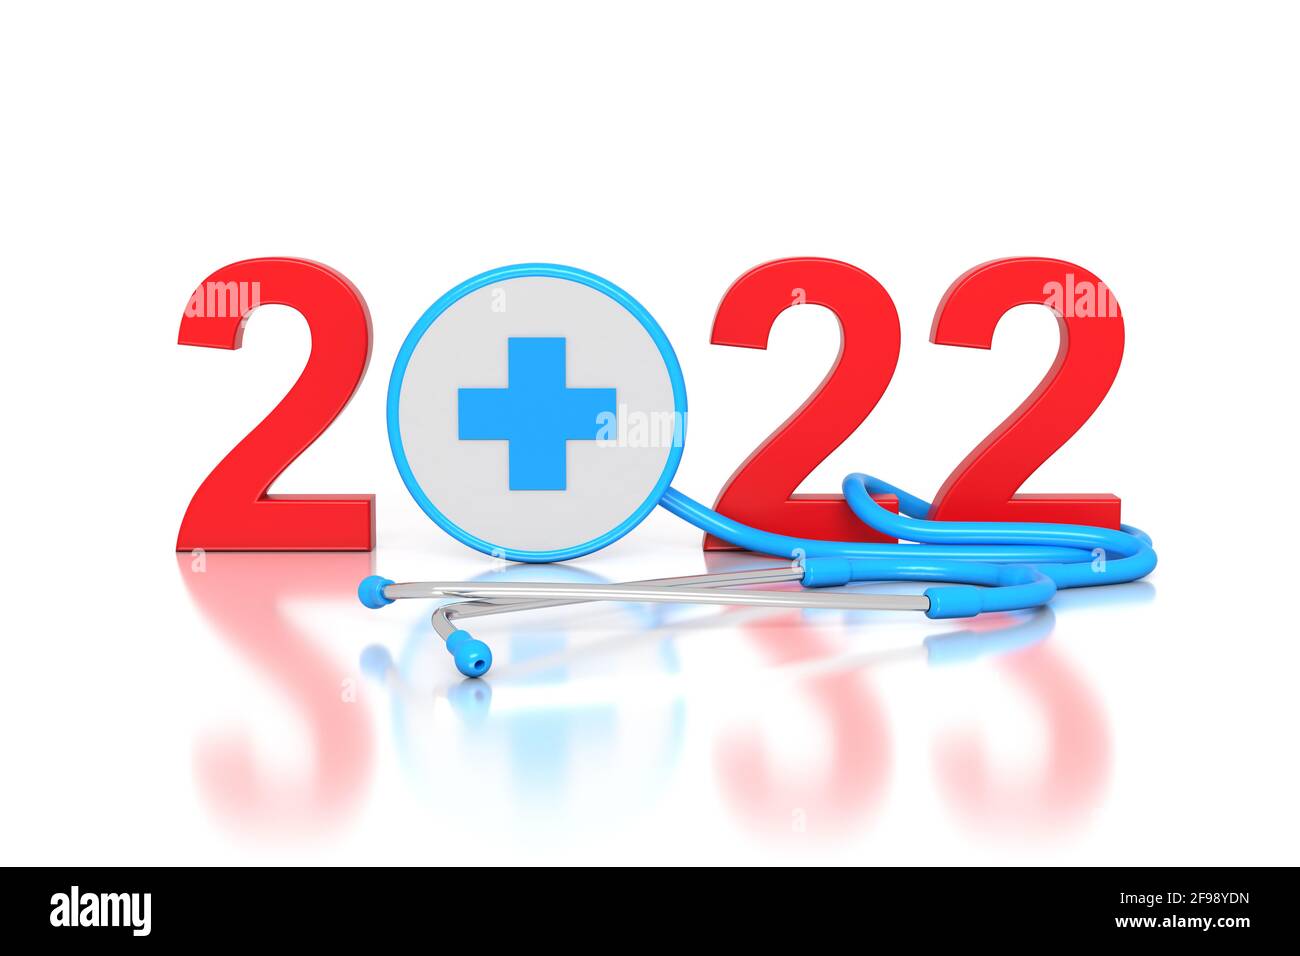 New Year 2022 Creative Design Concept with stethoscope - 3D Rendered Image Stock Photo